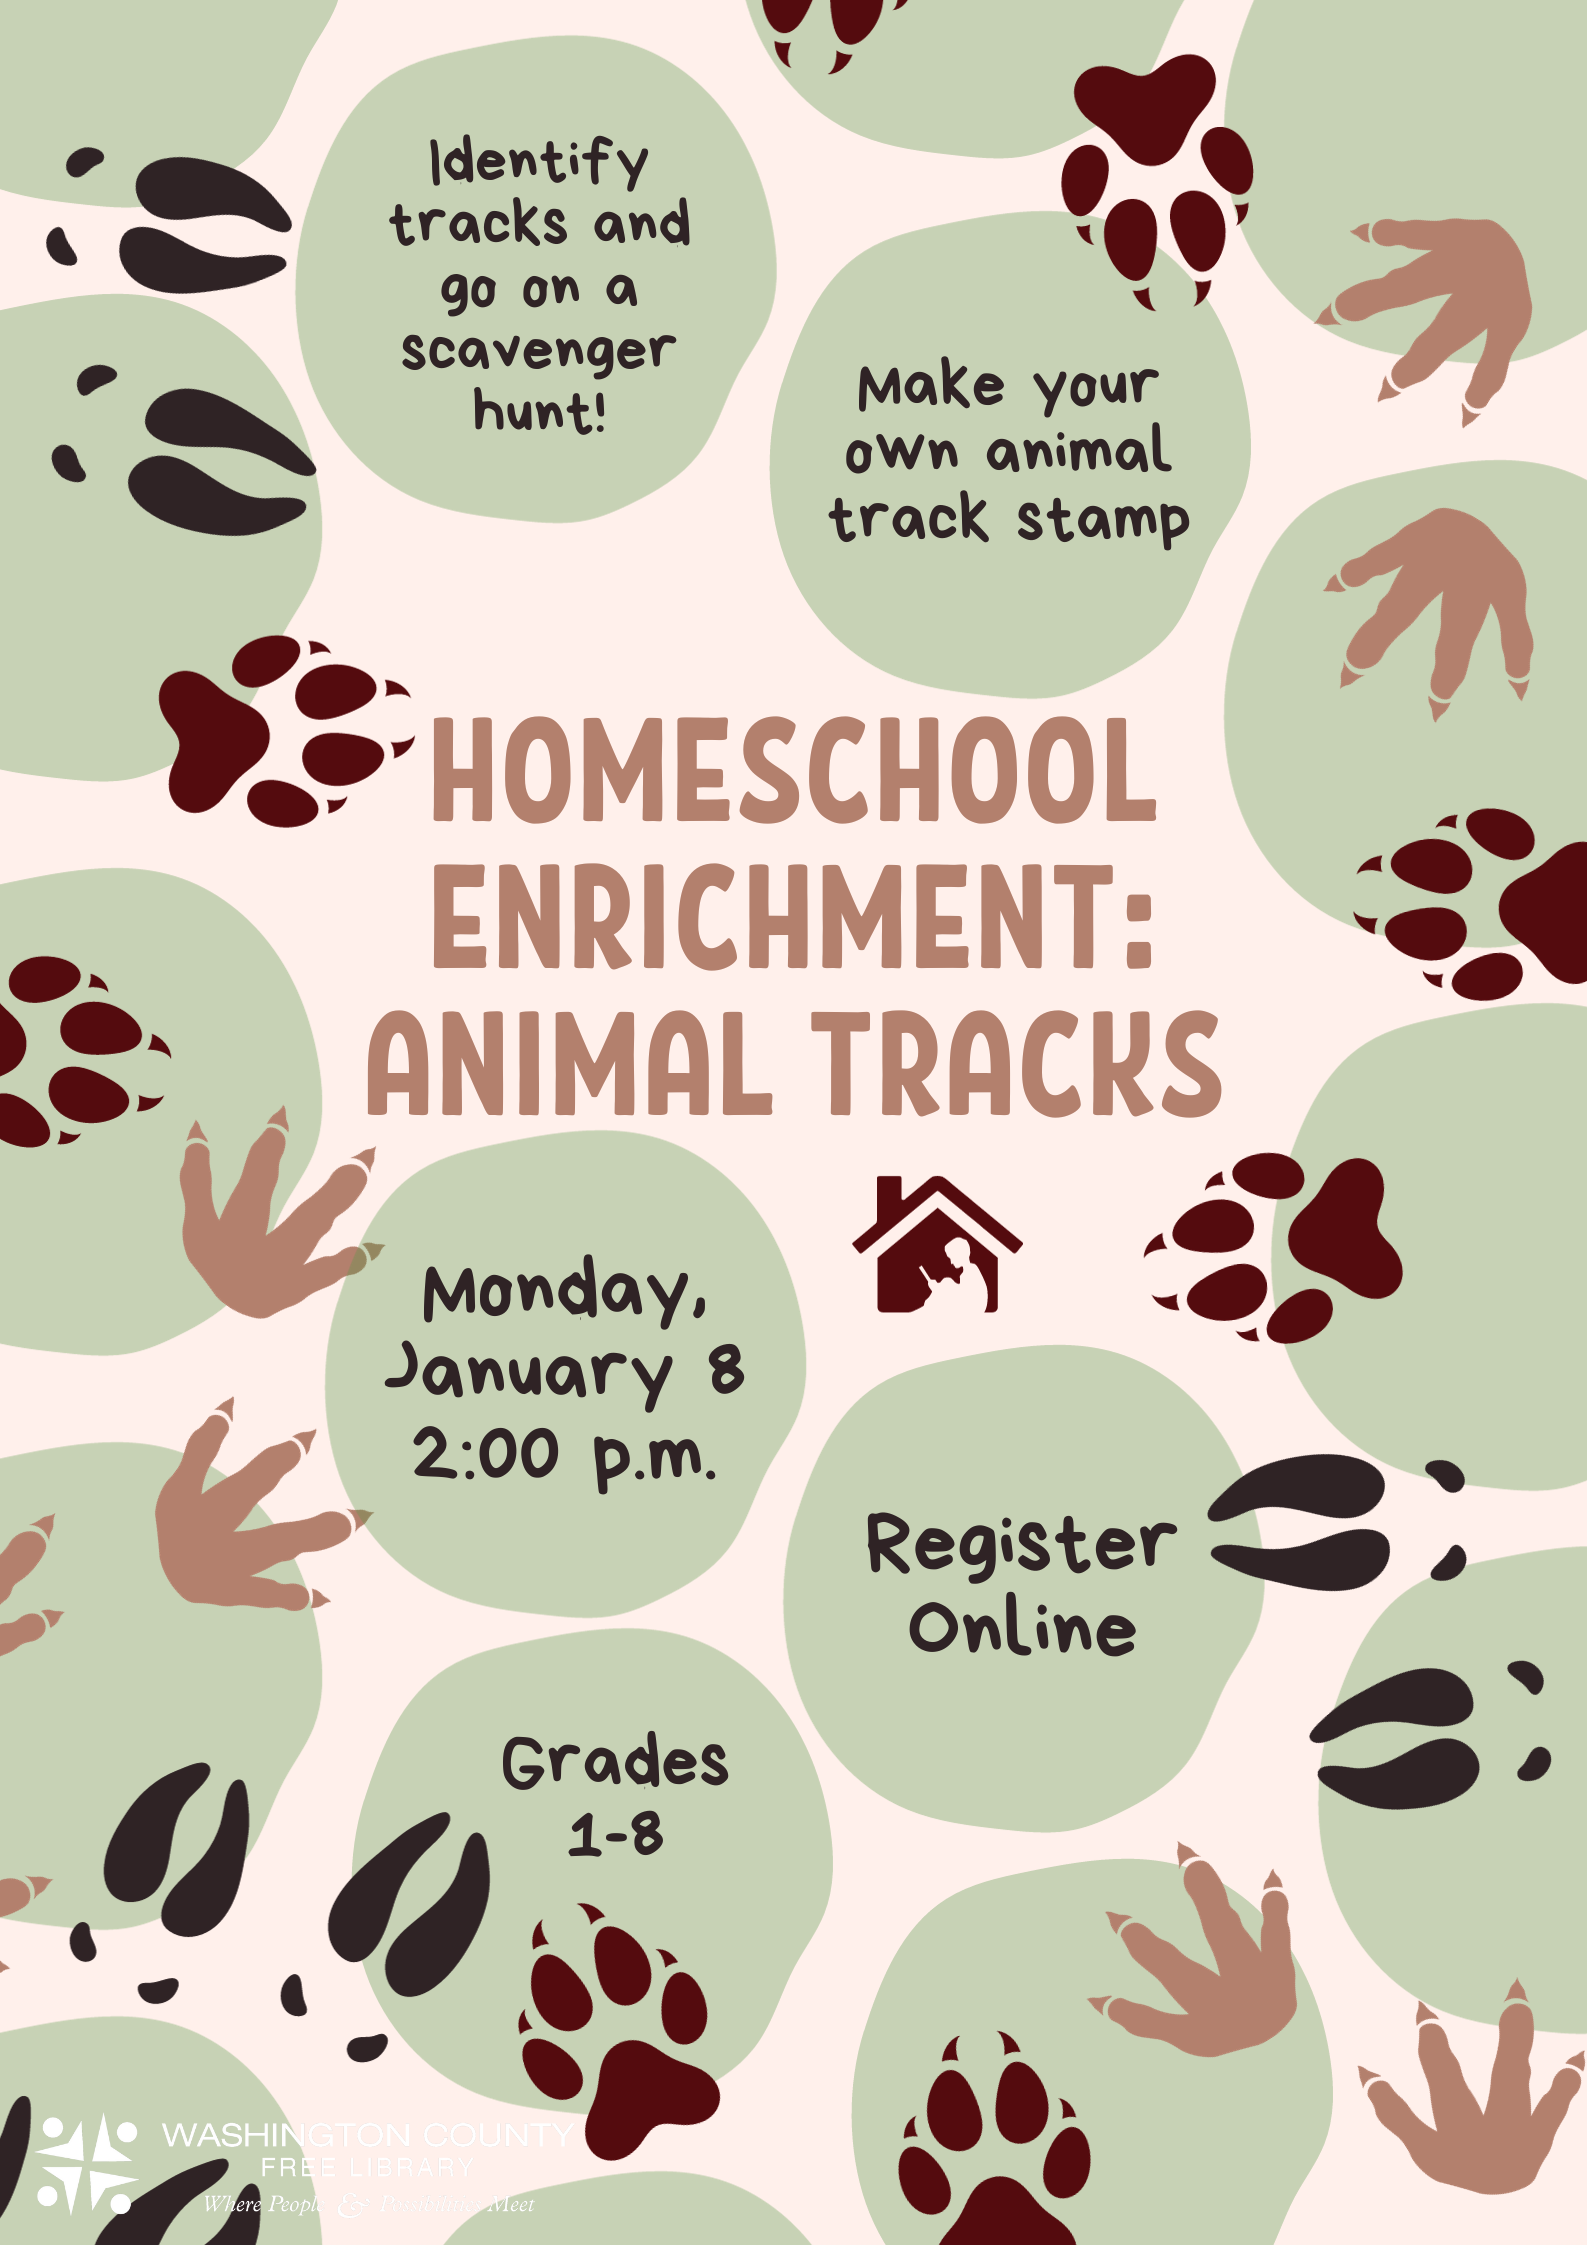 Flyer for January 8, 2024 Homeschool Enrichment Class: Animal Tracking. The flyer has green blobs in the background, with different colored animal tracks in the foreground such as deer, raccoon and dog or fox tracks. The flyer gives the following information for the event: Identify animal tracks and go on a scavenger hunt. Make your own animal track stamp. Monday, January 8 at 2:00 p.m. For grades 1 through 8. Register online. 